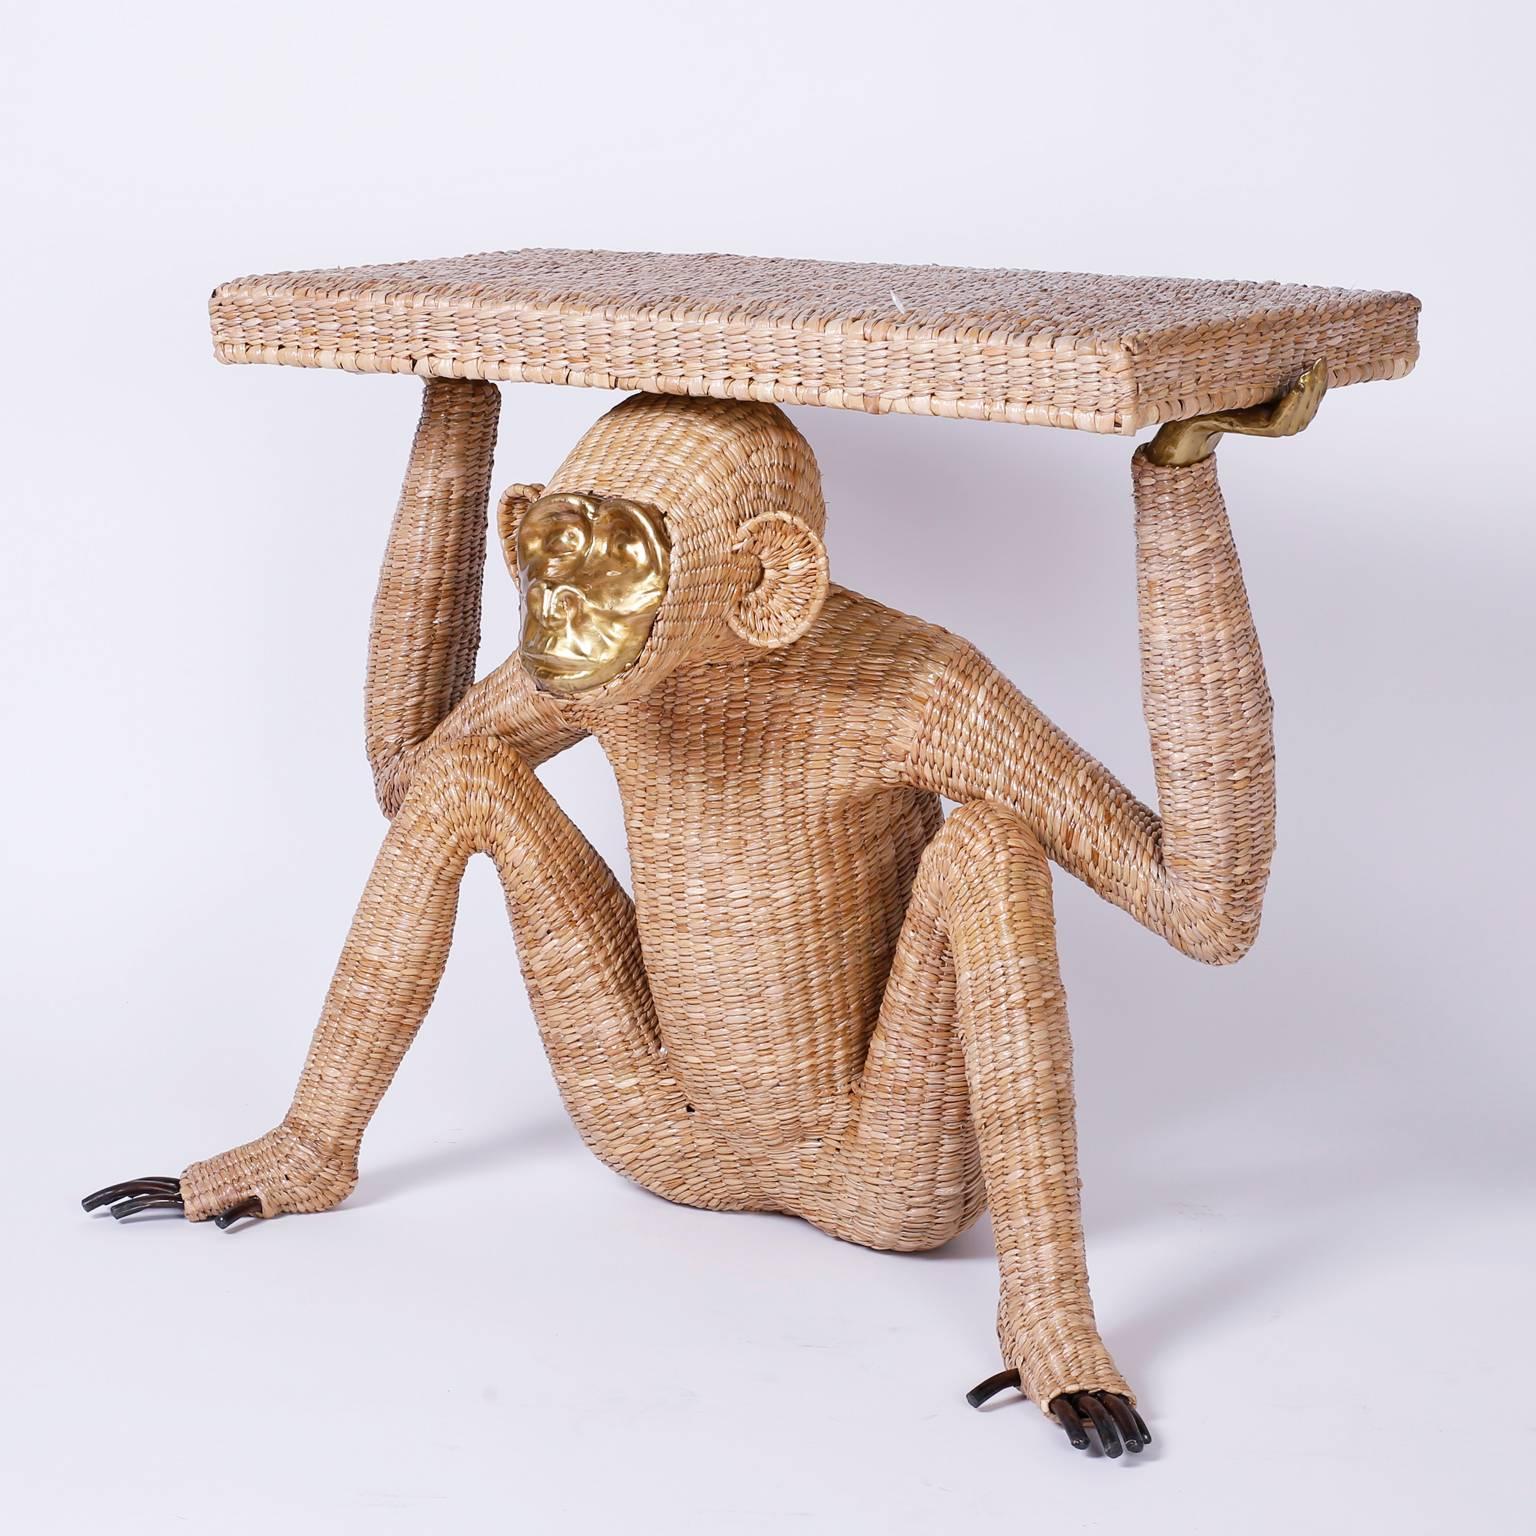 Mario Torres monkey or Chimpanzee console constructed with a metal frame expertly wrapped in wicker or reed. Having a pressed brass face and fingers and exposed toes. Labeled with a brass medallion Mario Lopez Torres 1974. Note that Mr. Torres used